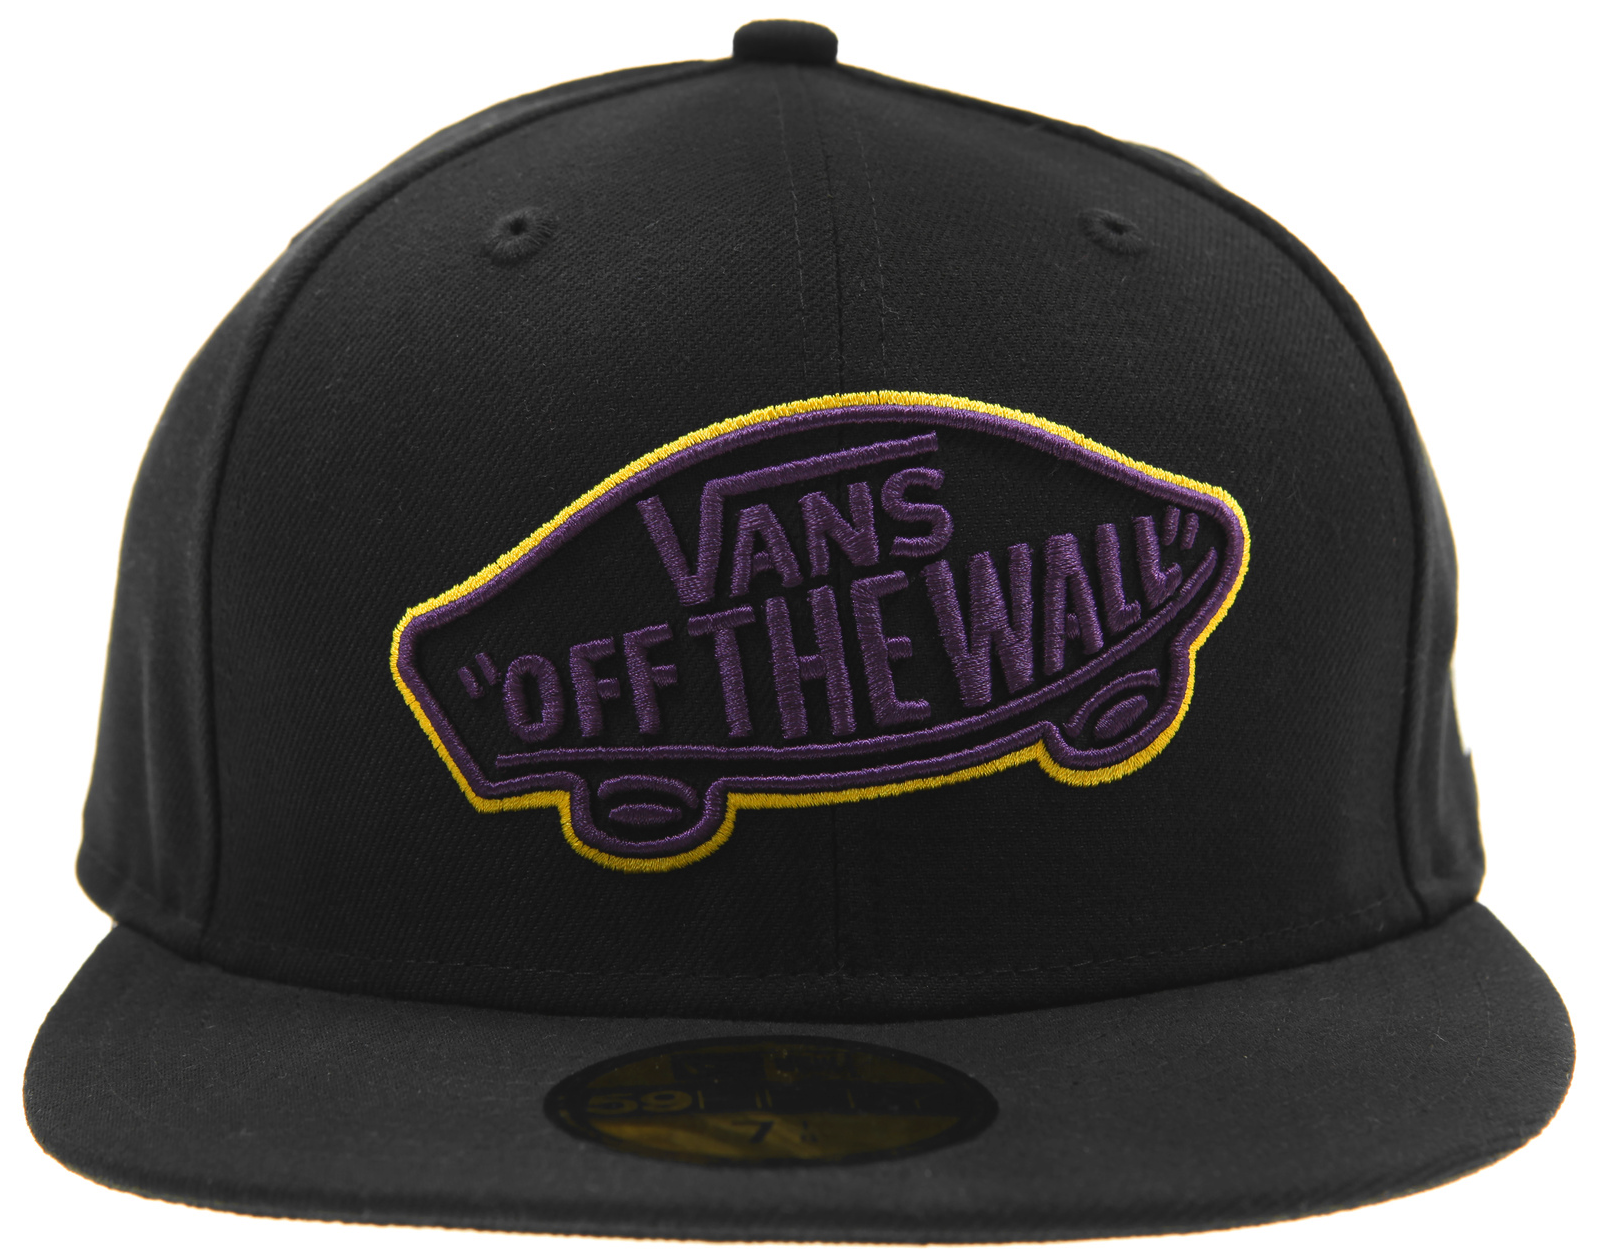 Fitted Nation: Vans